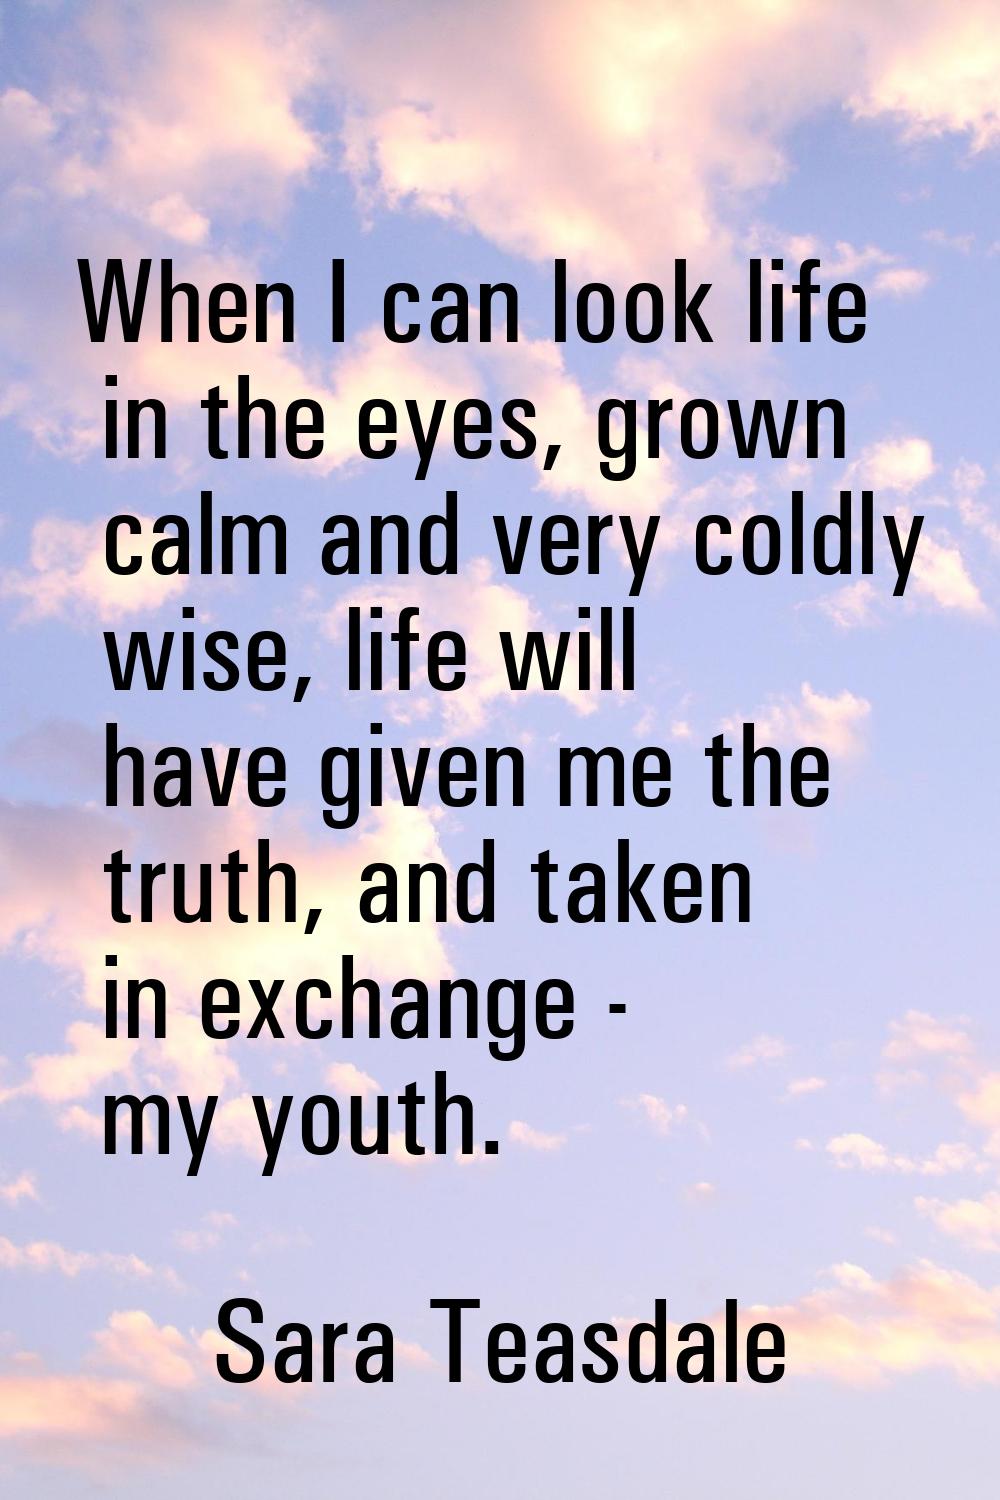 When I can look life in the eyes, grown calm and very coldly wise, life will have given me the trut